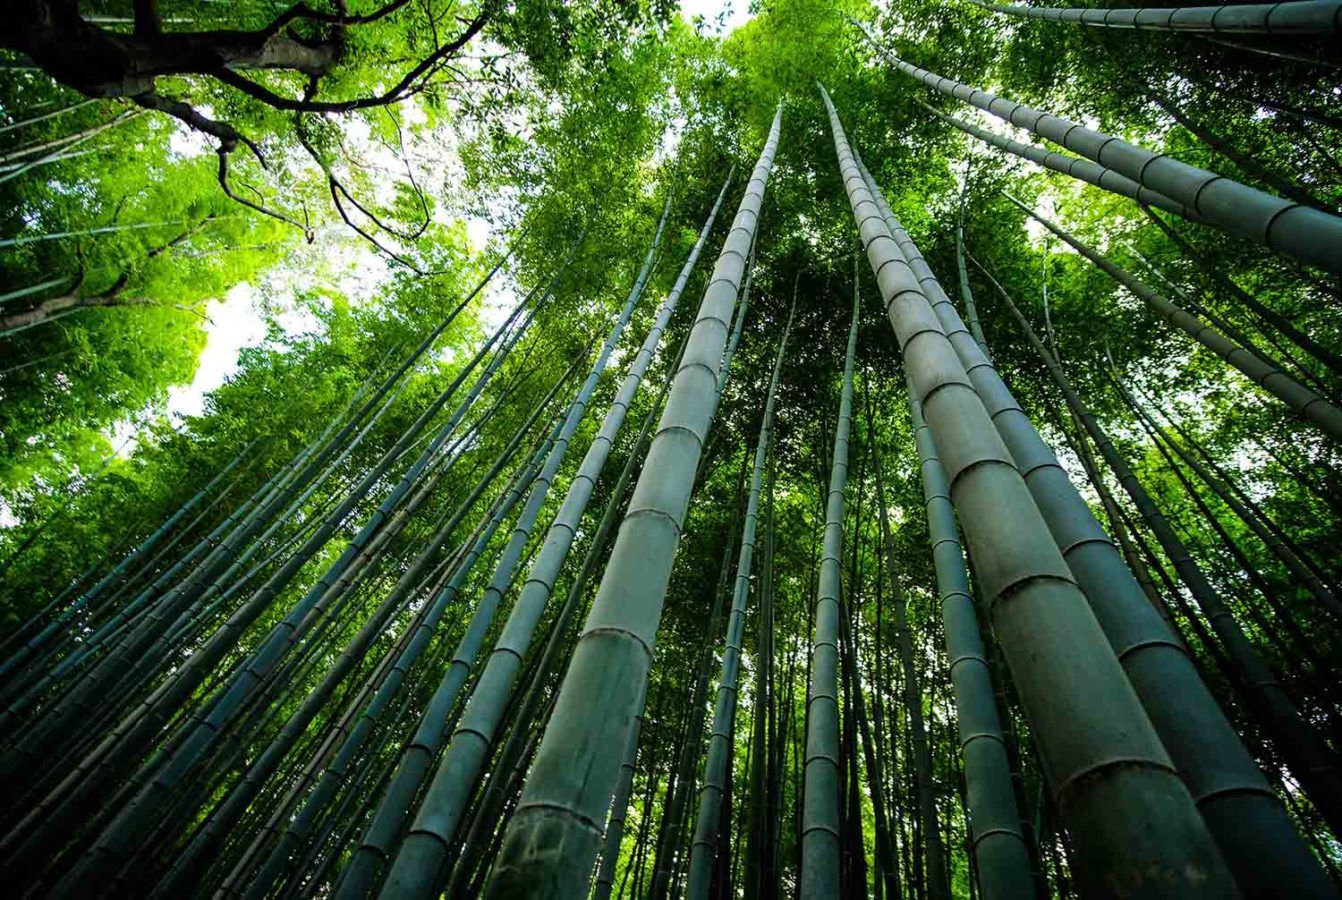 Why bamboo extract is huge in K-Beauty (plus, the best bamboo products to buy)